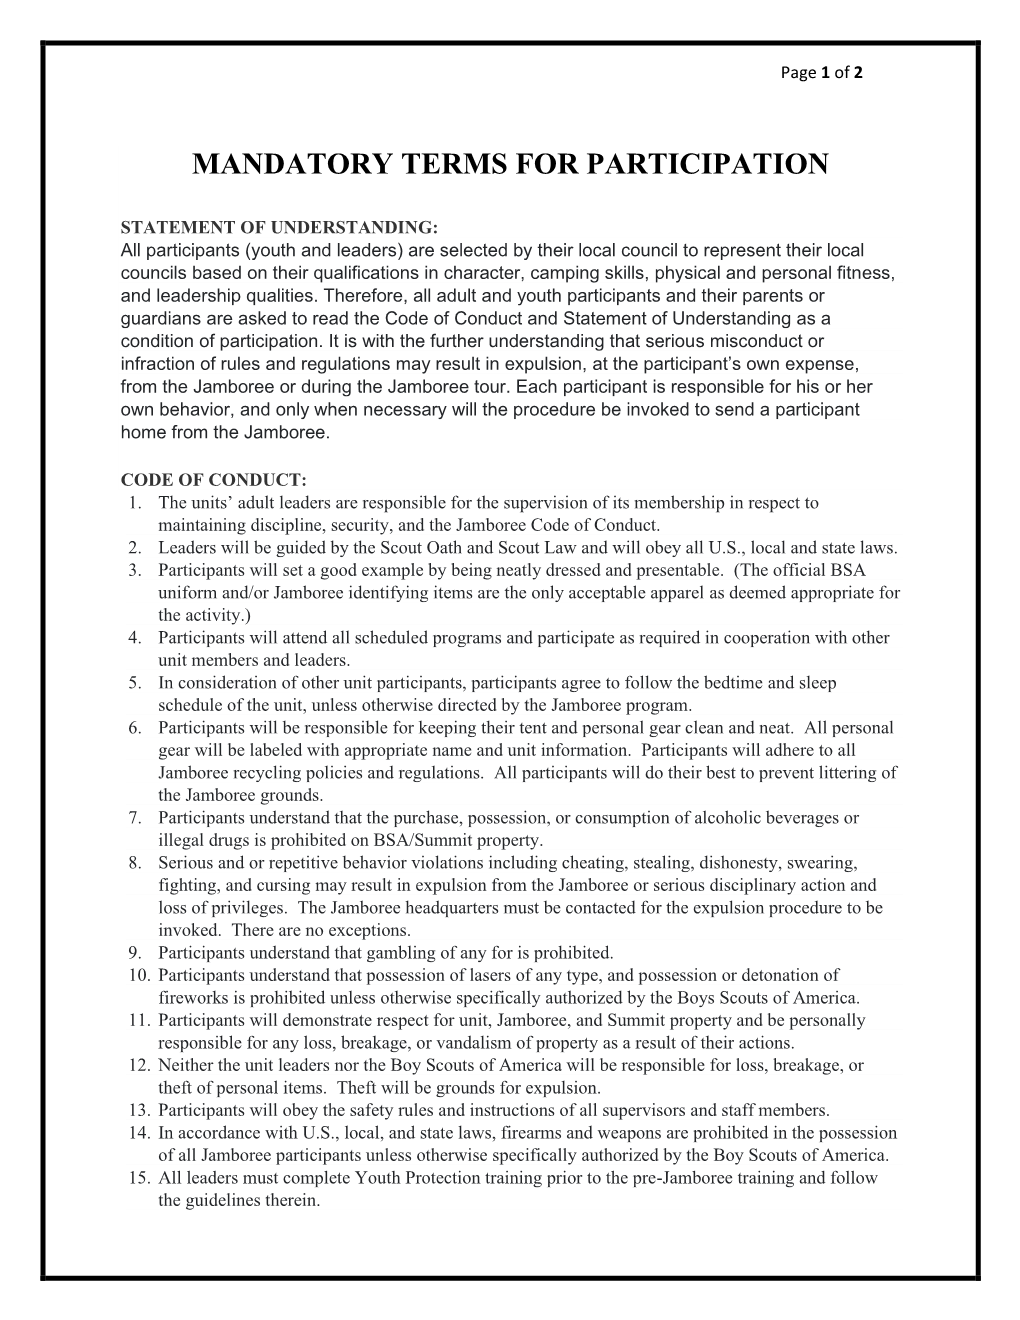 Mandatory Terms for Participation